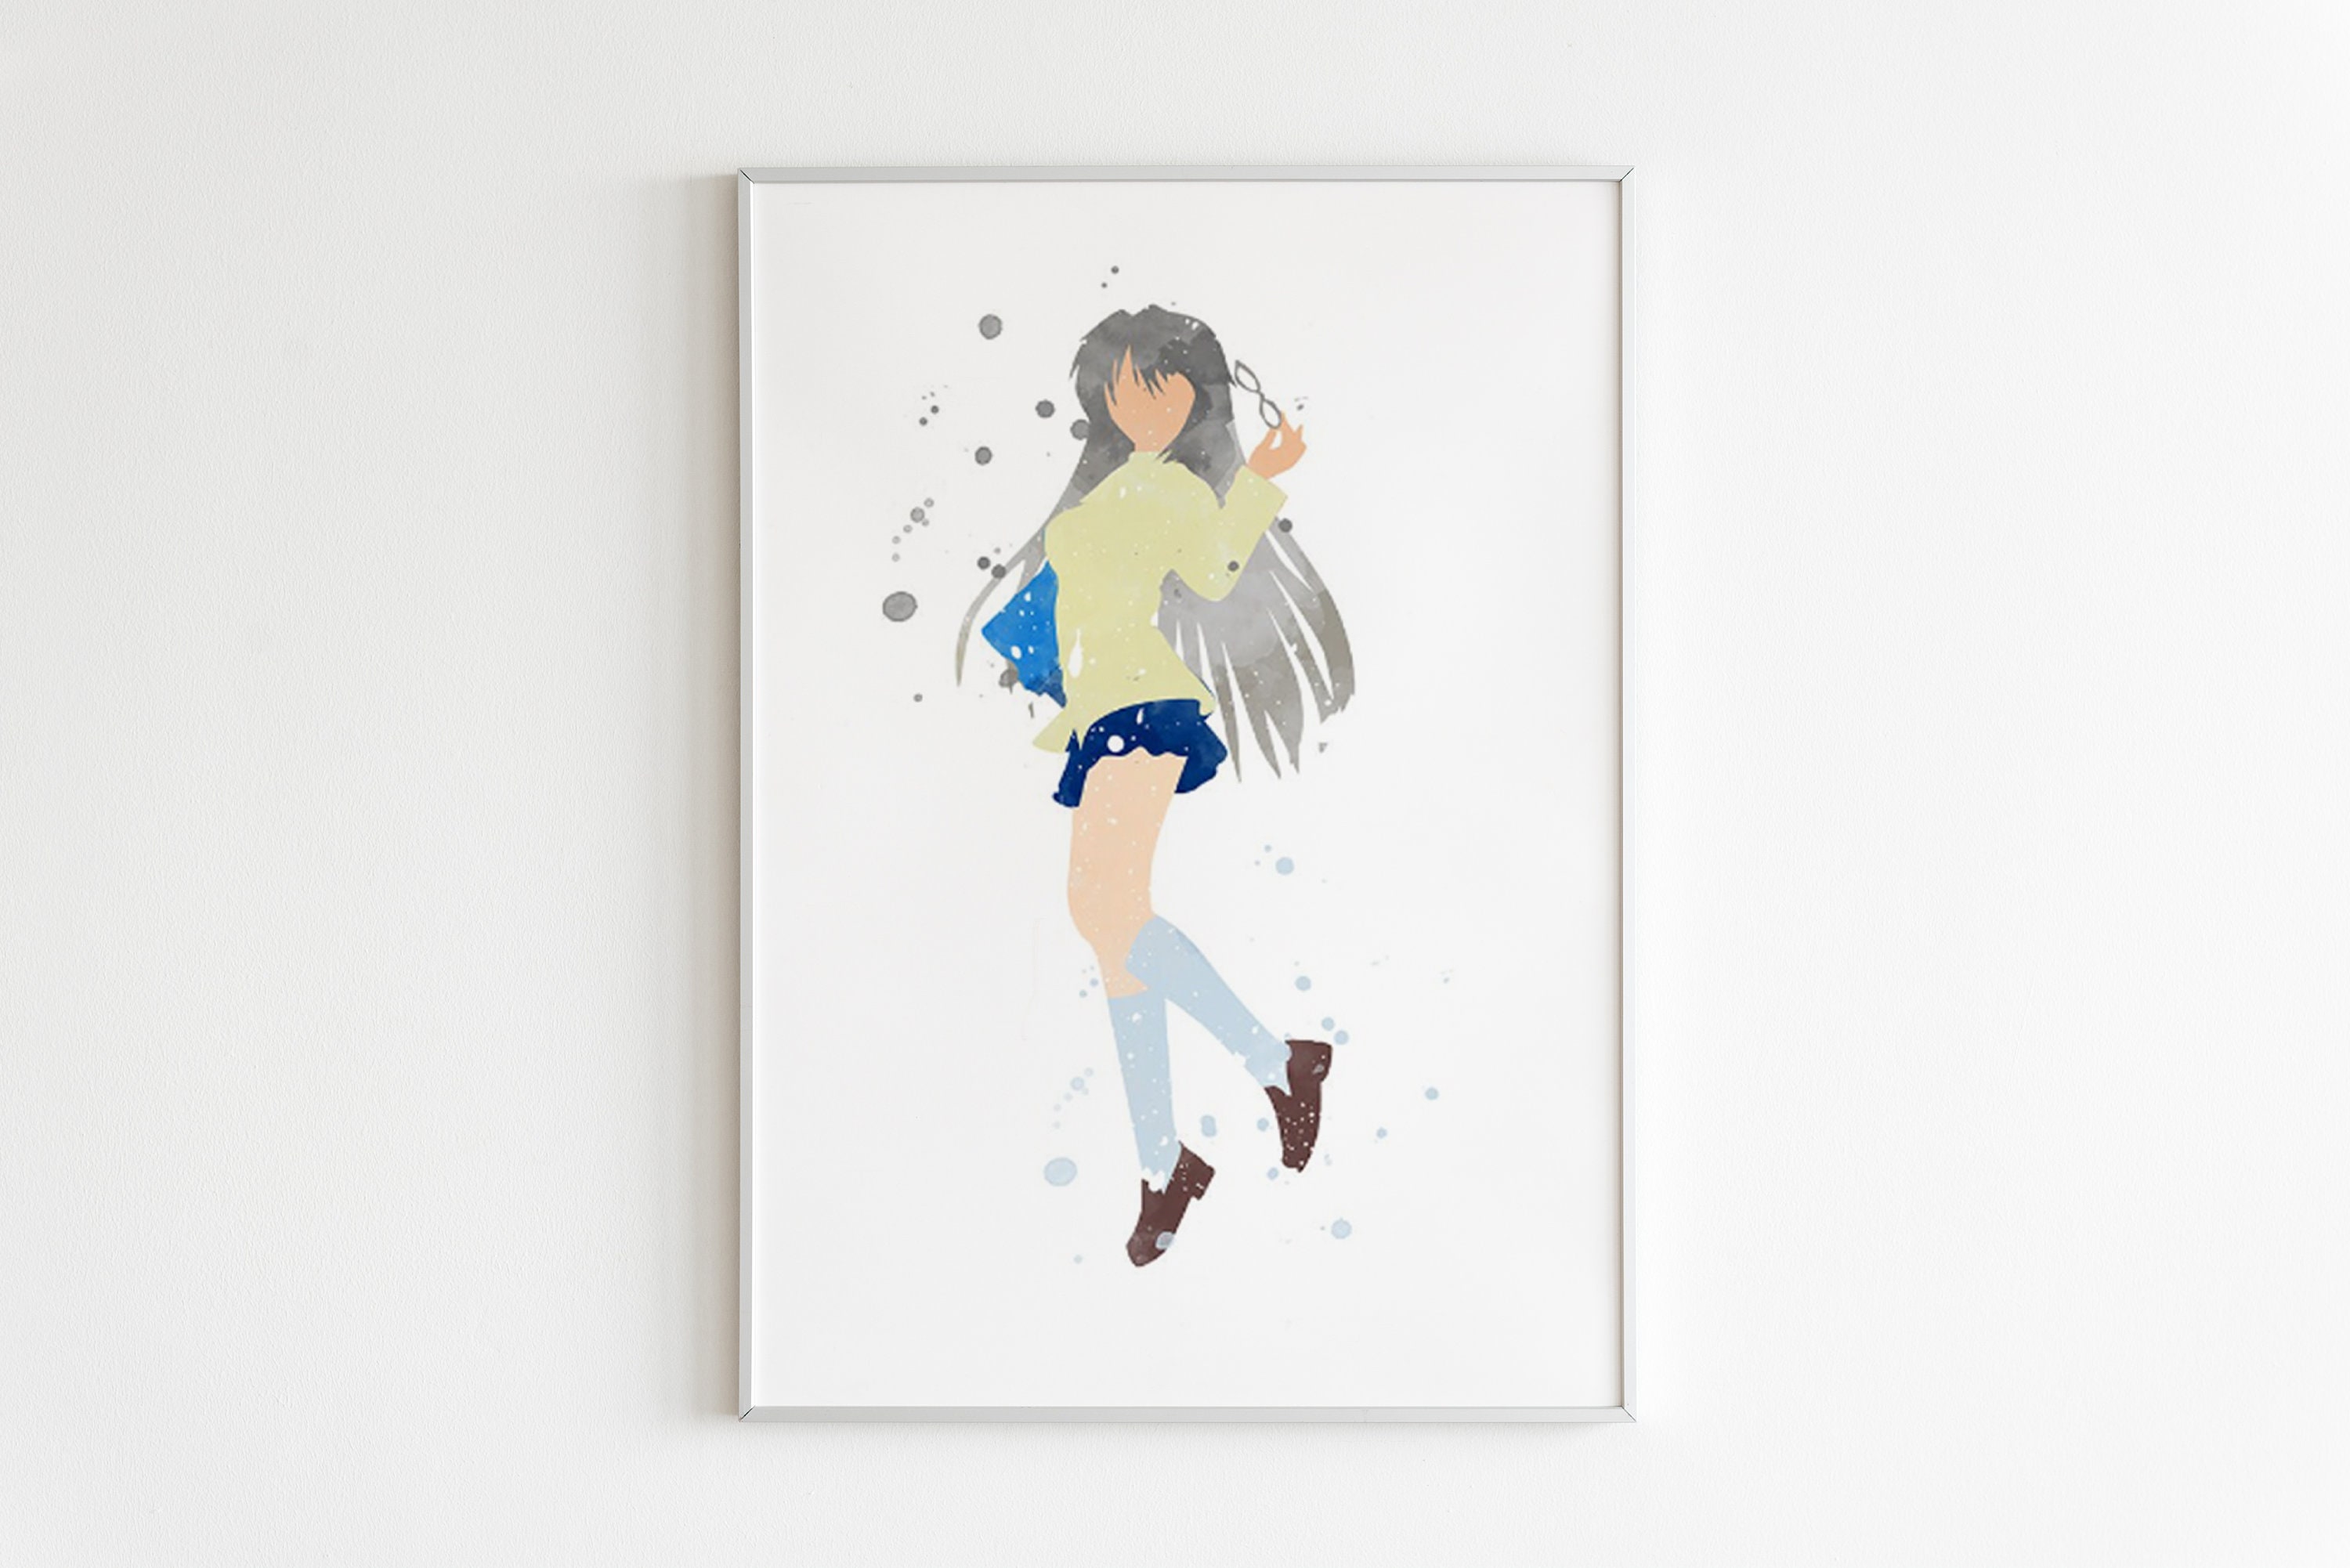 Cartoon Anime CLANNAD Posters and Prints Retro Painting Wall Art